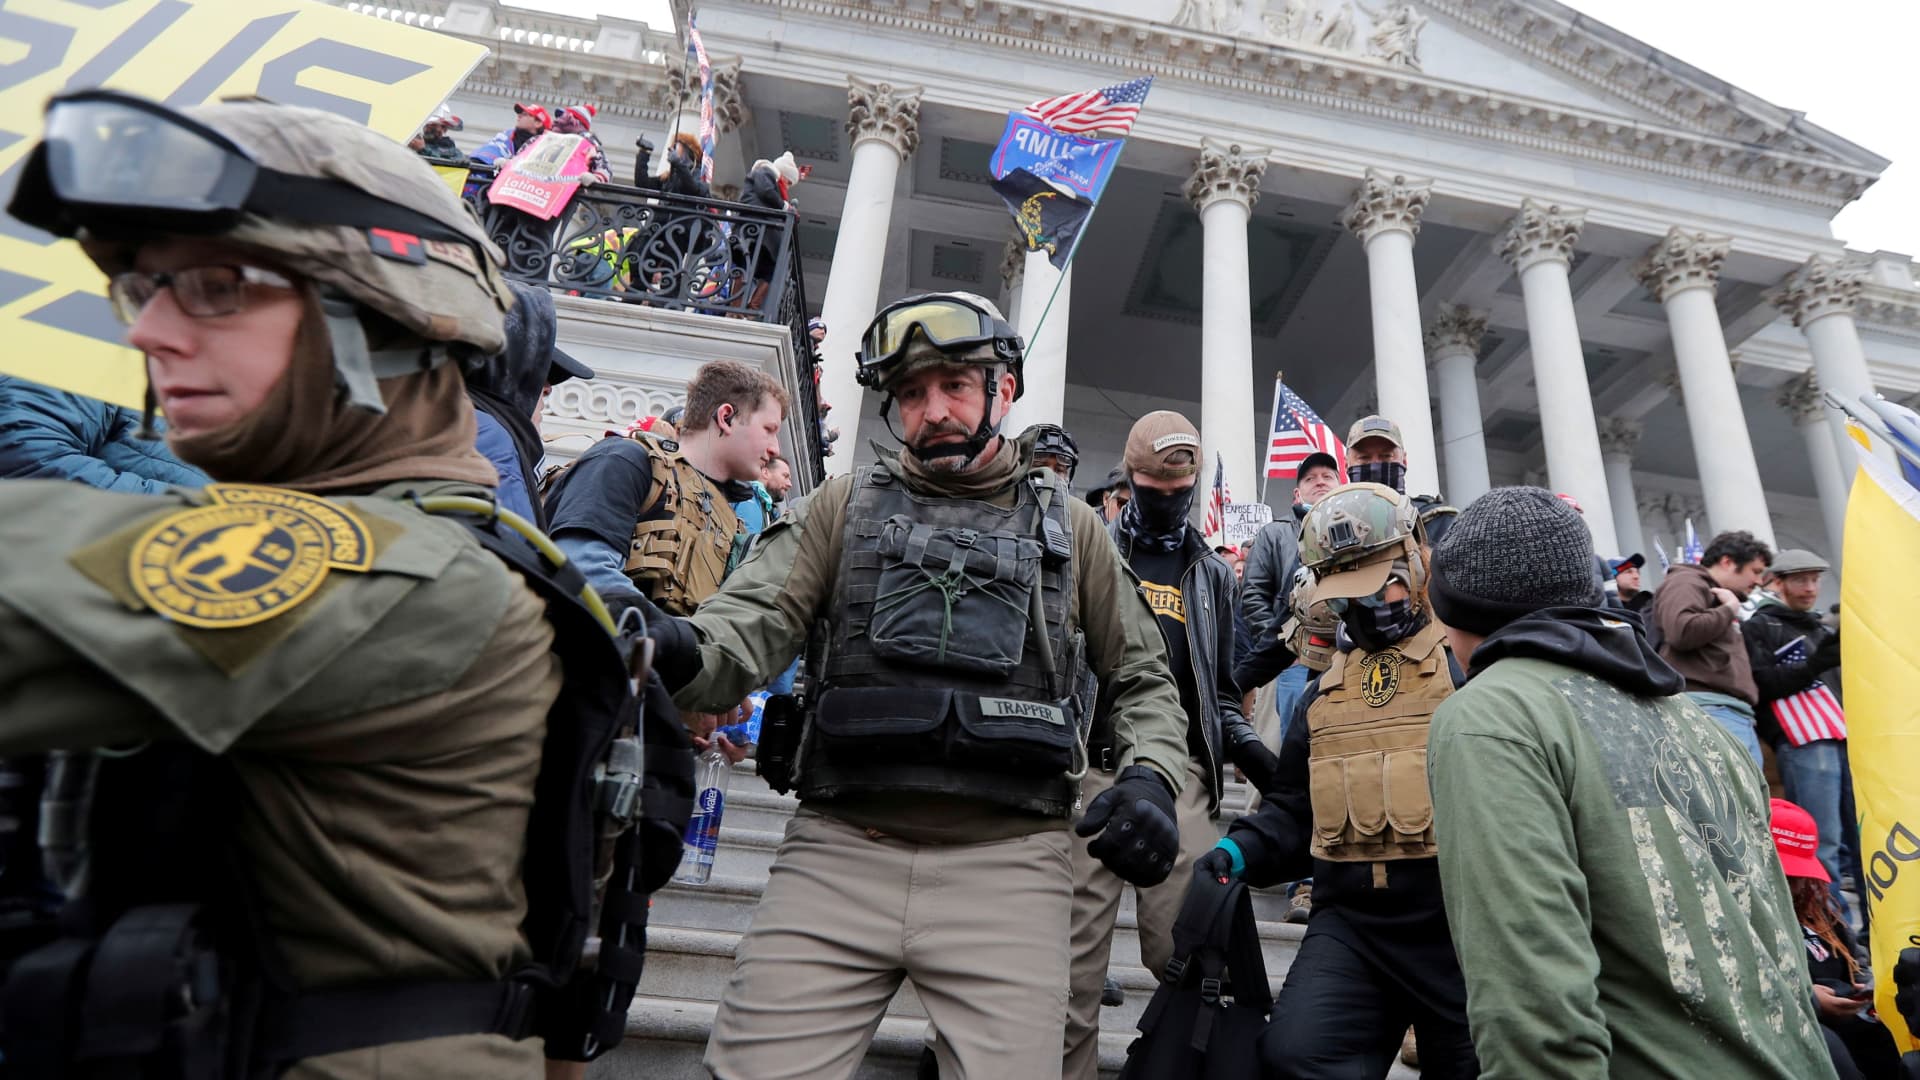 Members of the Oath Keepers militia group among supporters of U.S. President Donald Trump, on the steps of the U.S. Capitol, in Washington, January 6, 2021.